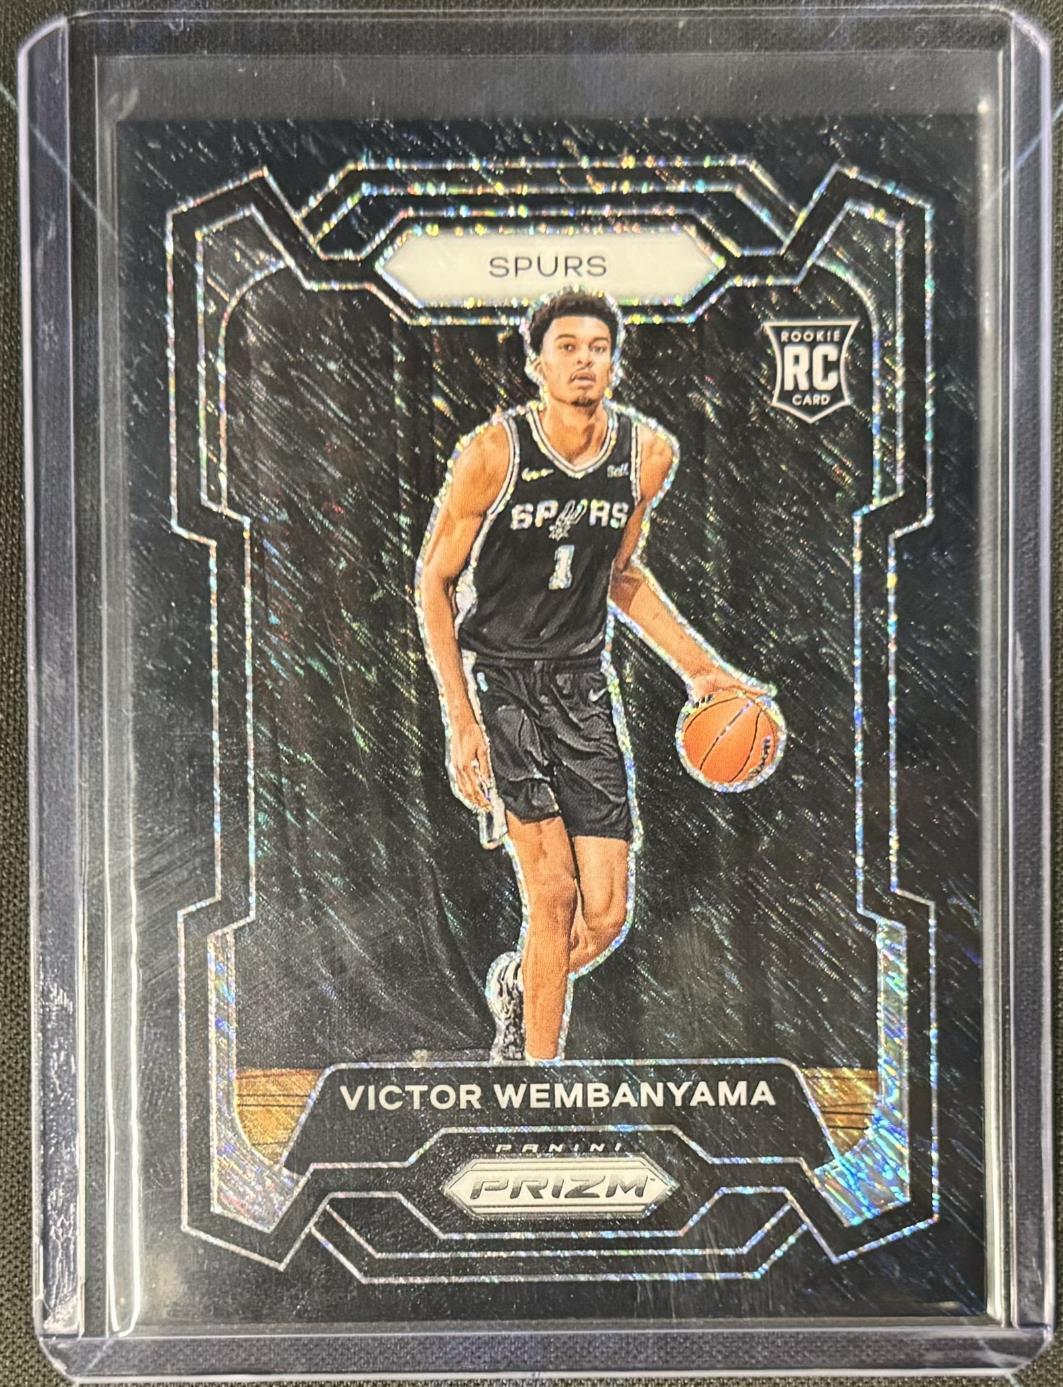 Rare Victor Wembanyama Rookie Card Selling For $500,000 On eBay 